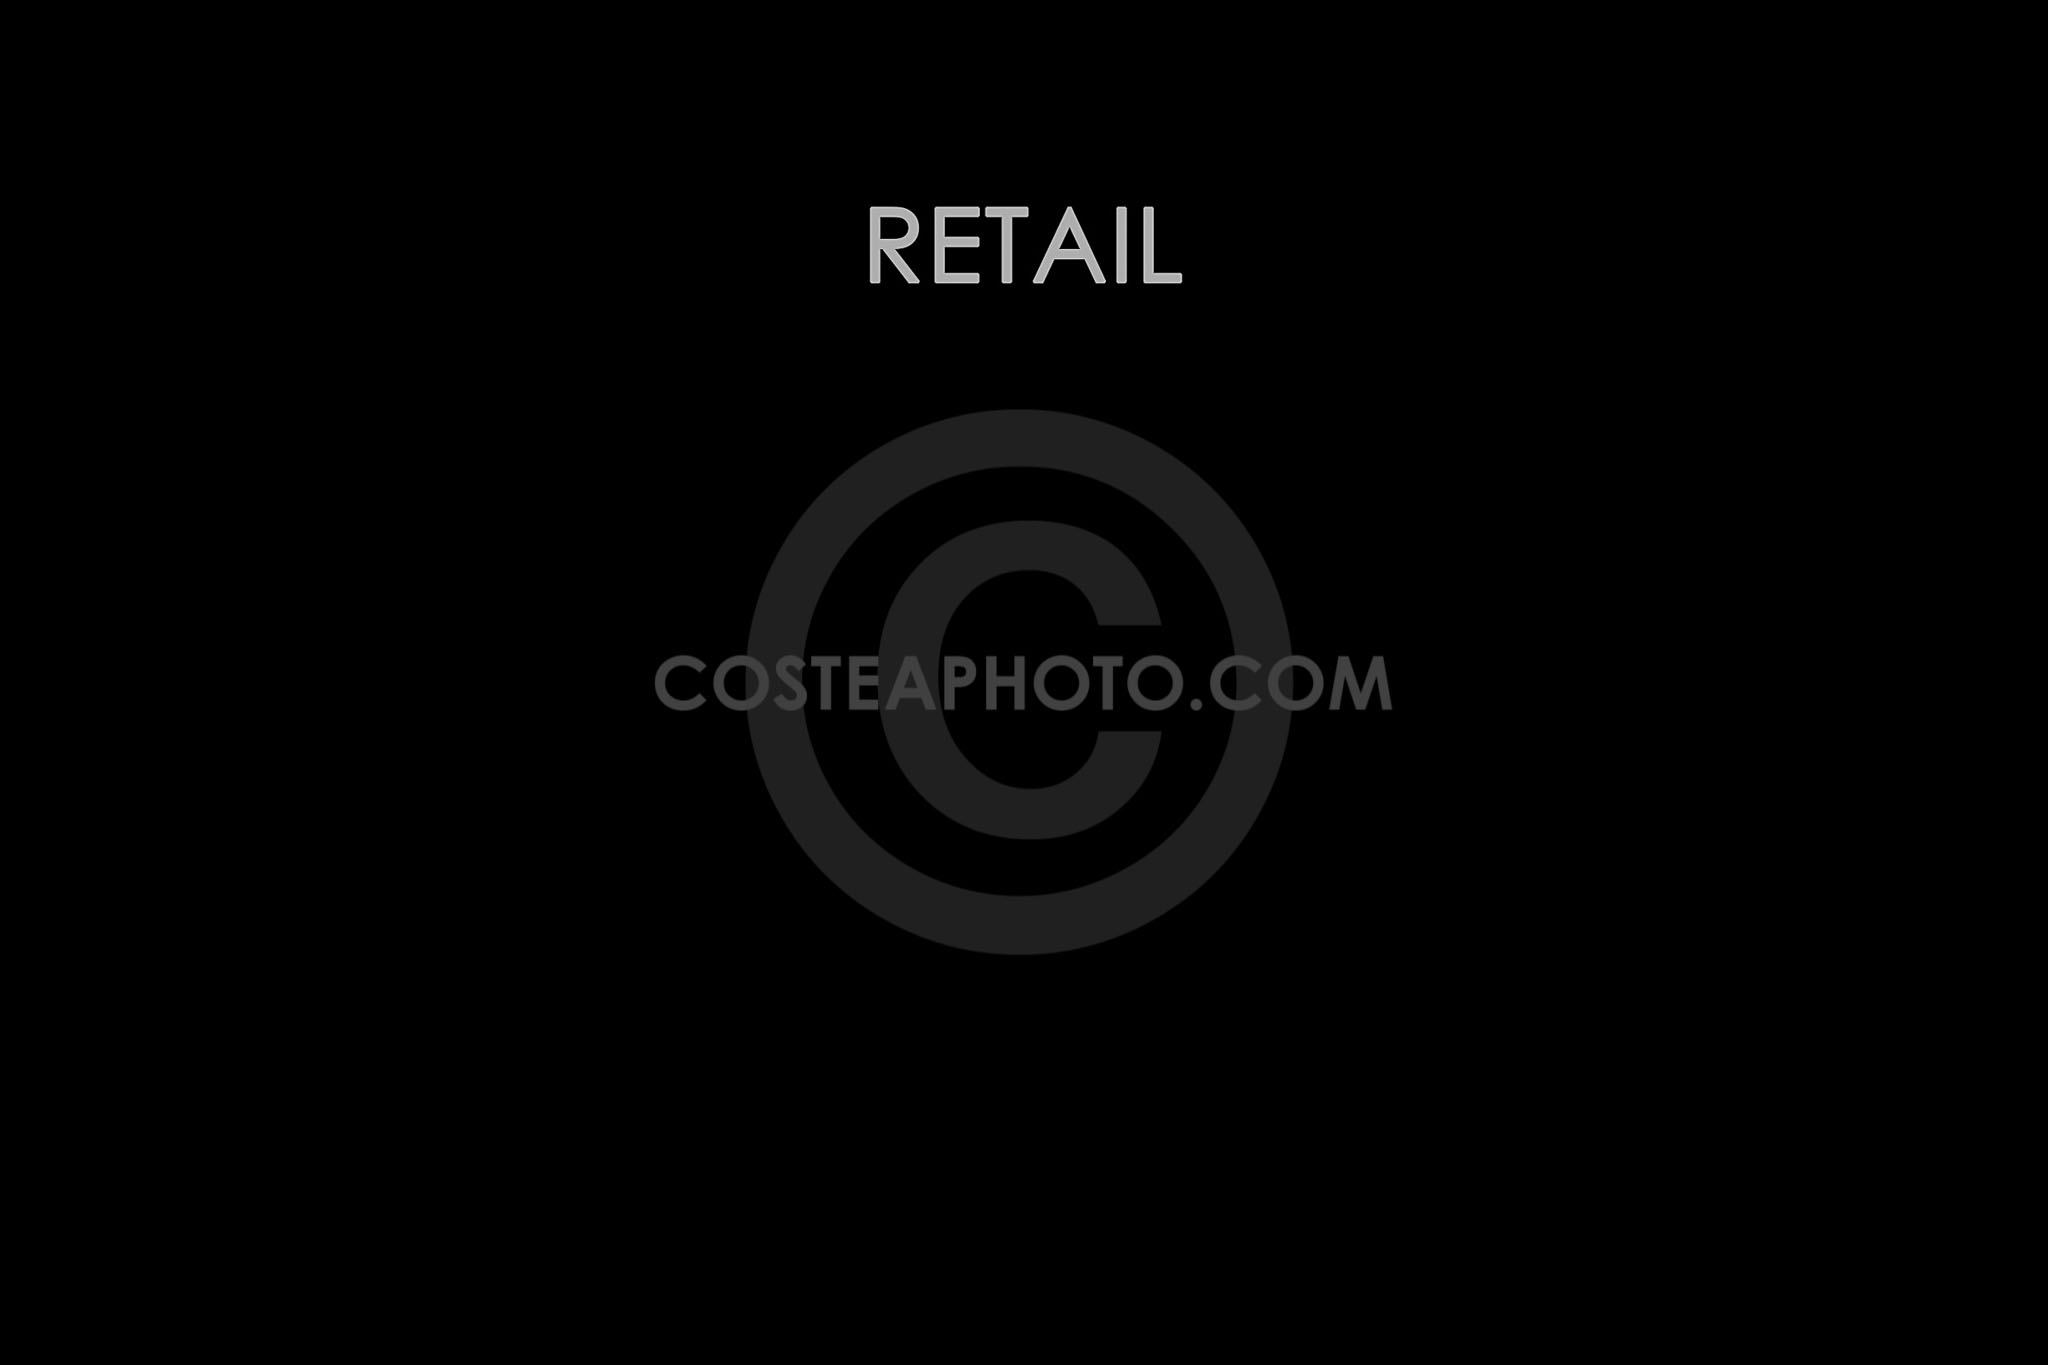 (076) TITLE PAGE - RETAIL